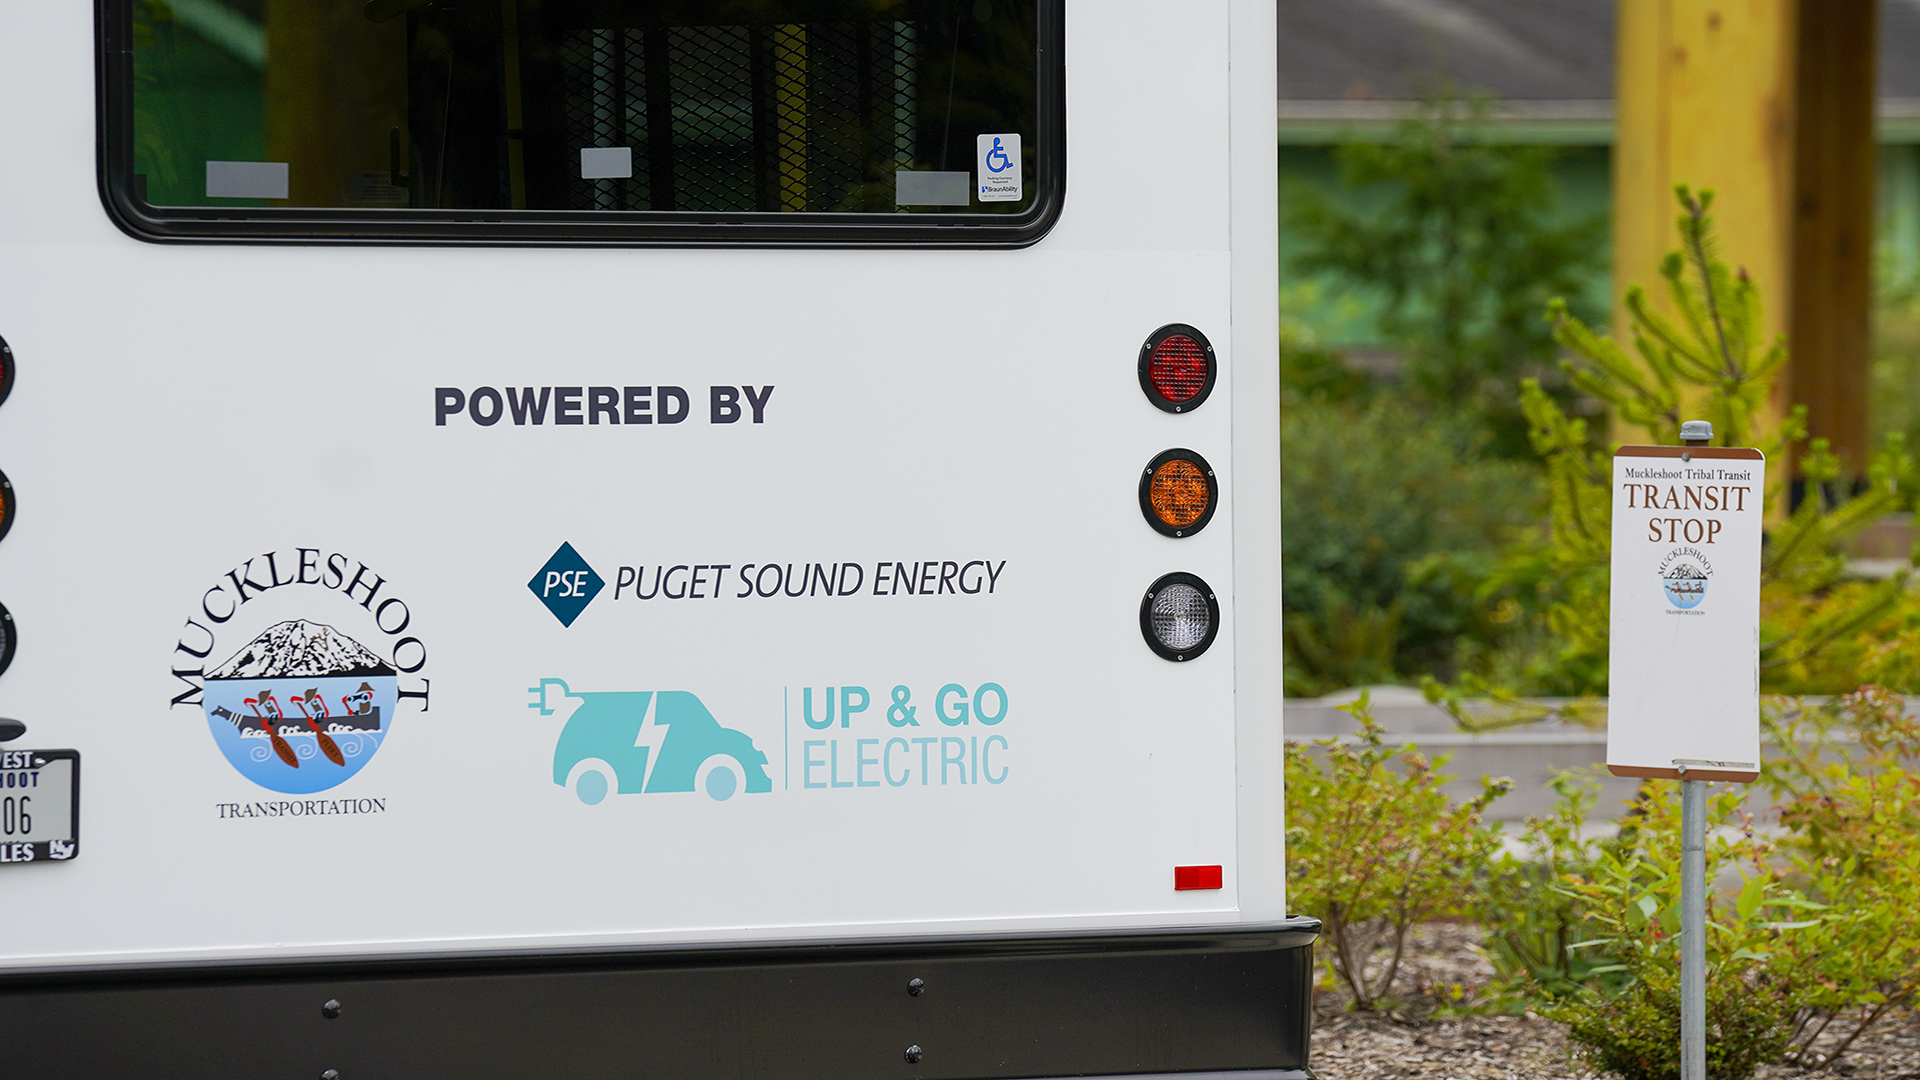 Our Equity Focused pilot aimed to bring the benefits of transportation electrification to all customers through projects like this electric bus for Muckleshoot Transportation.